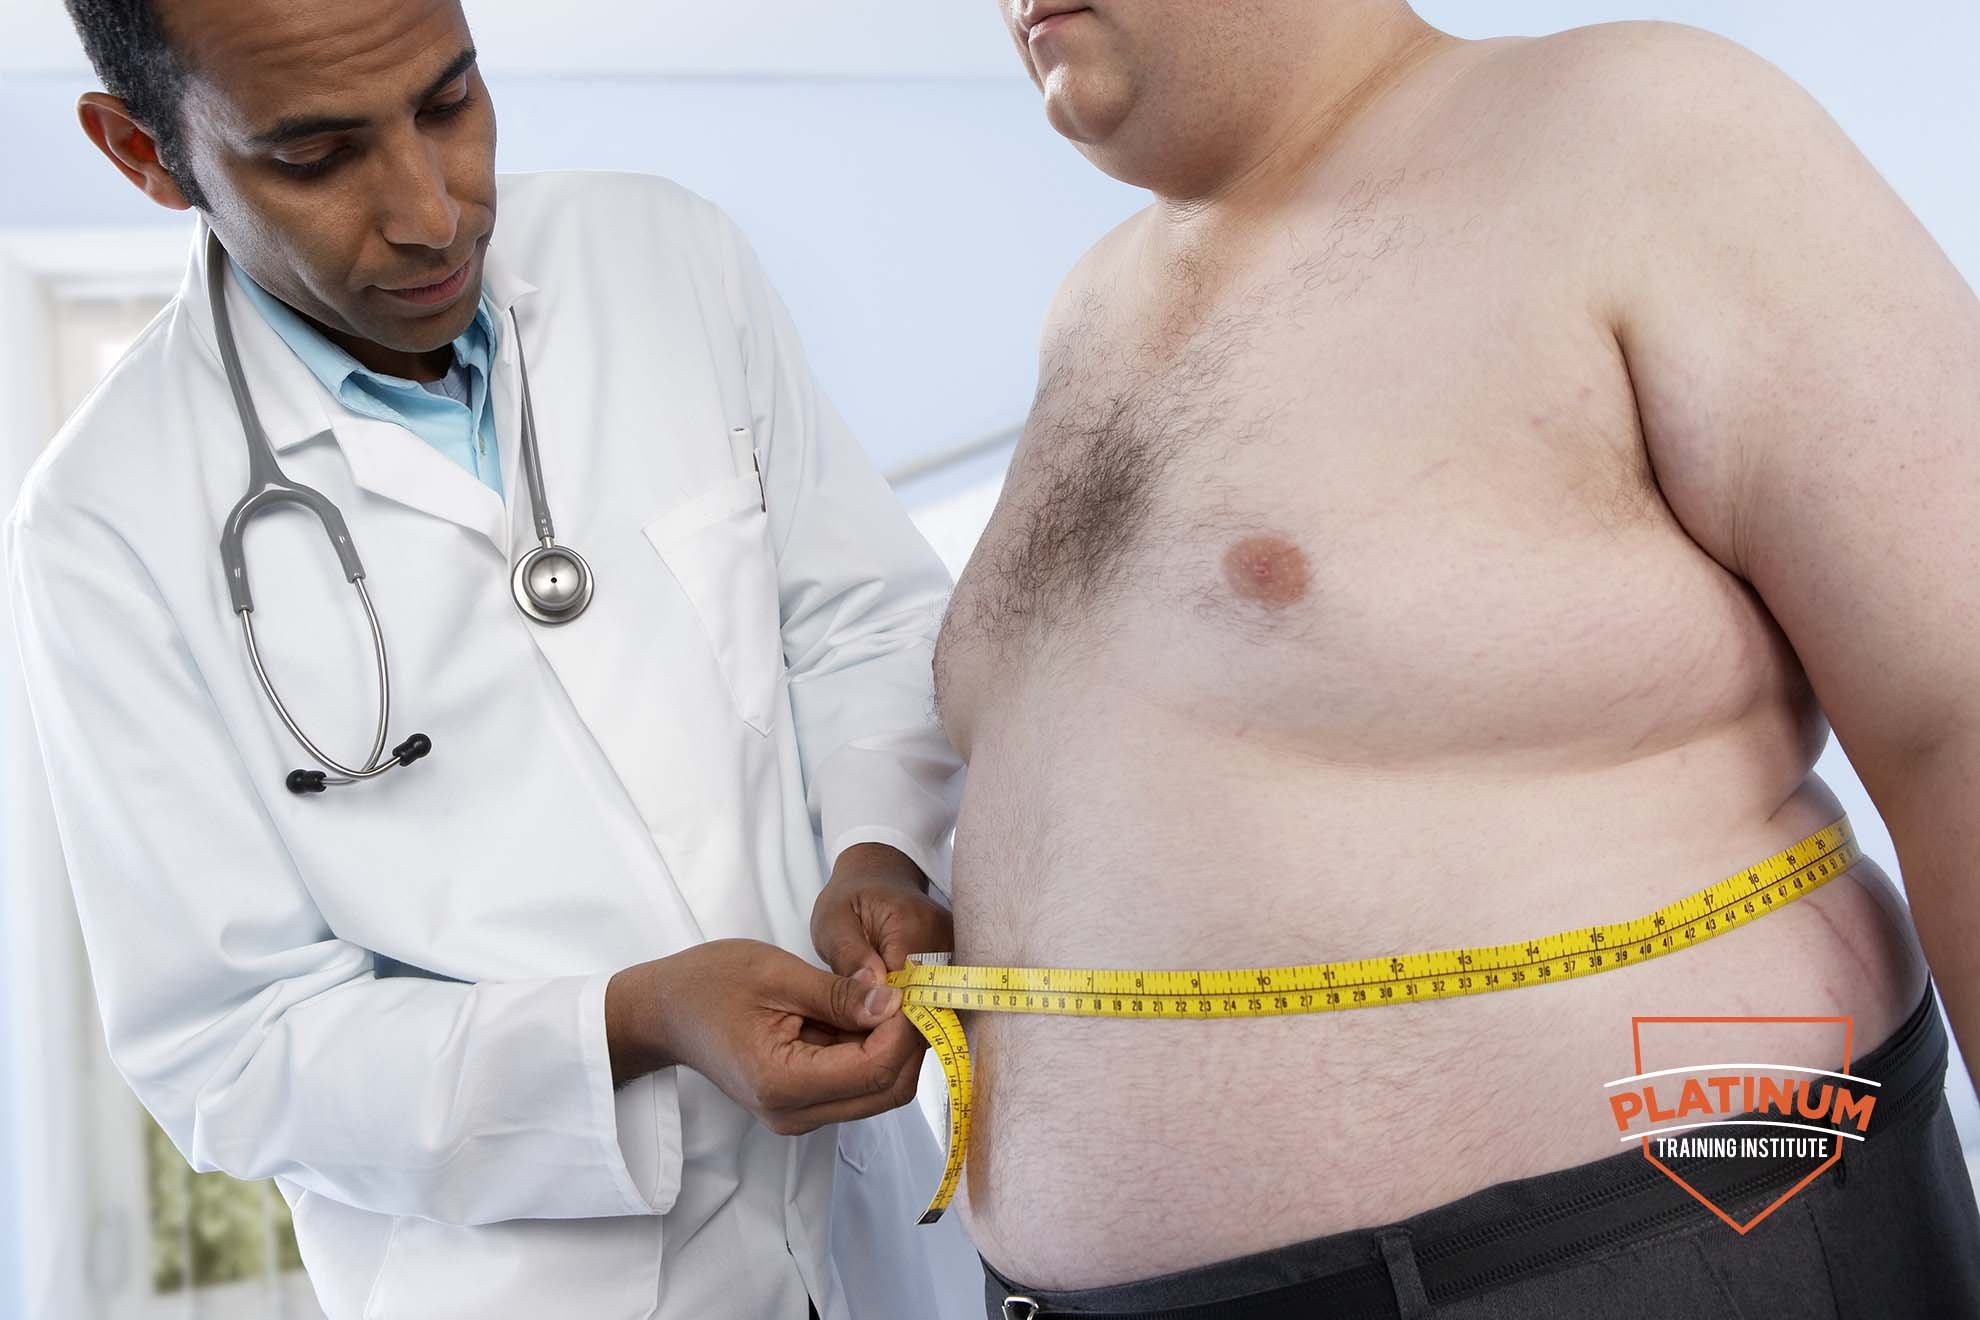 YMCA Level 4 Certificate in Weight Management for Individuals with Obesity, Diabetes Mellitus and/or Metabolic Syndrome